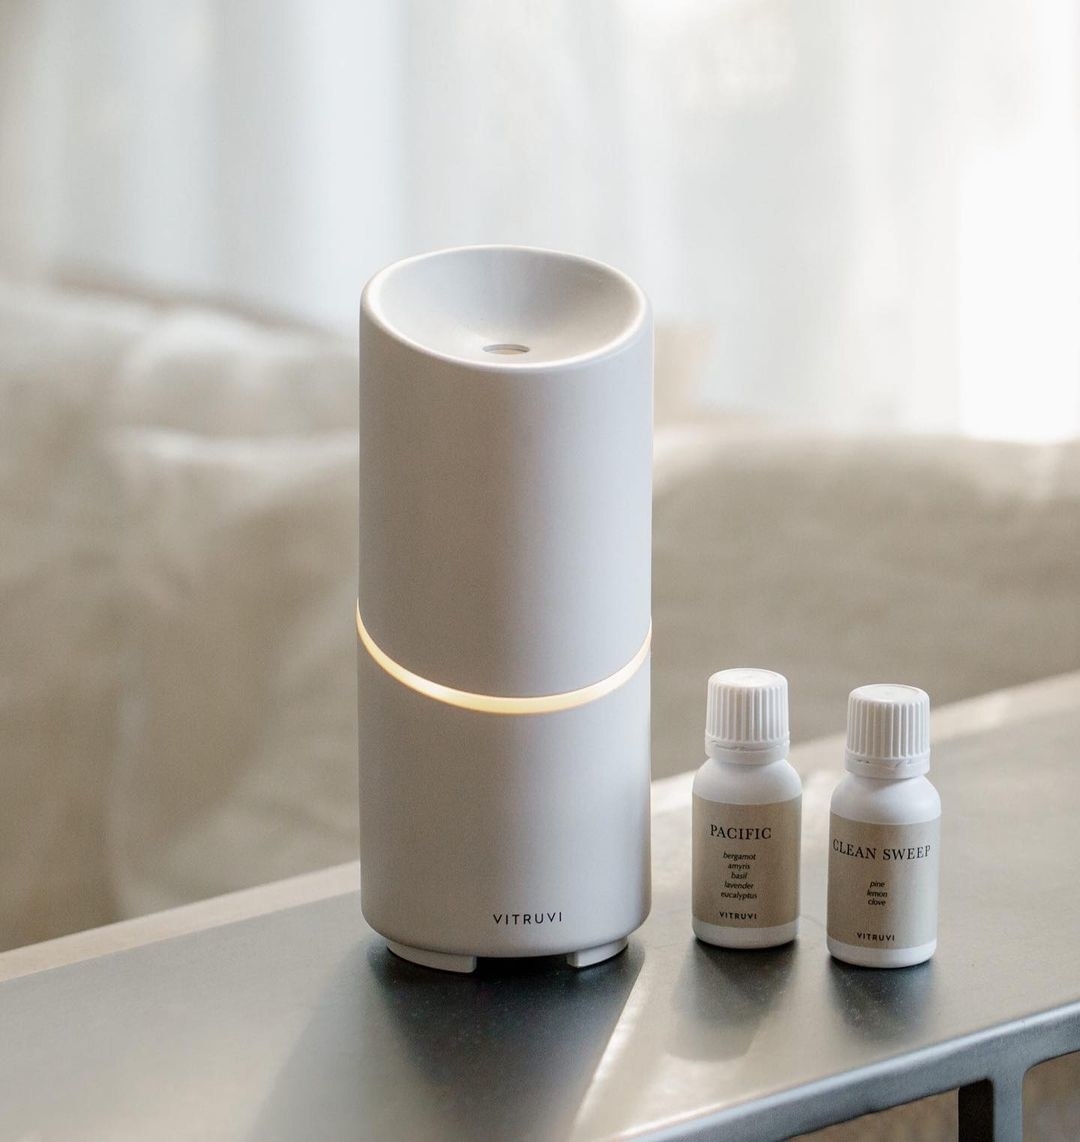 A cordless electronic diffuser next to two bottles of essential oils